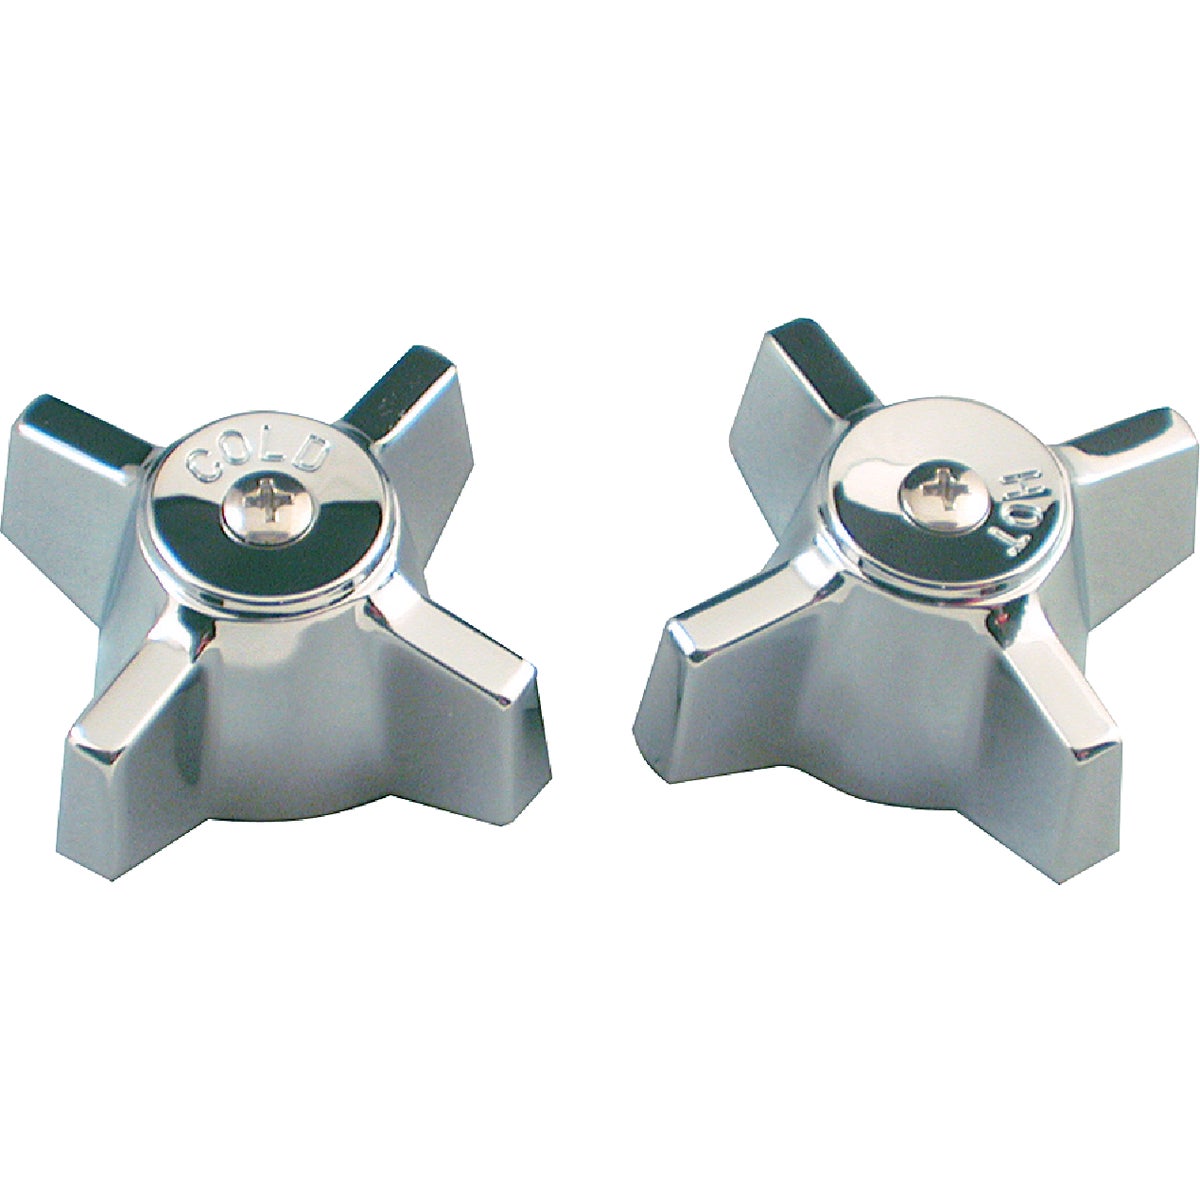 Item 414573, OEM style metal cross style handles for Sterling kitchen and bathroom 